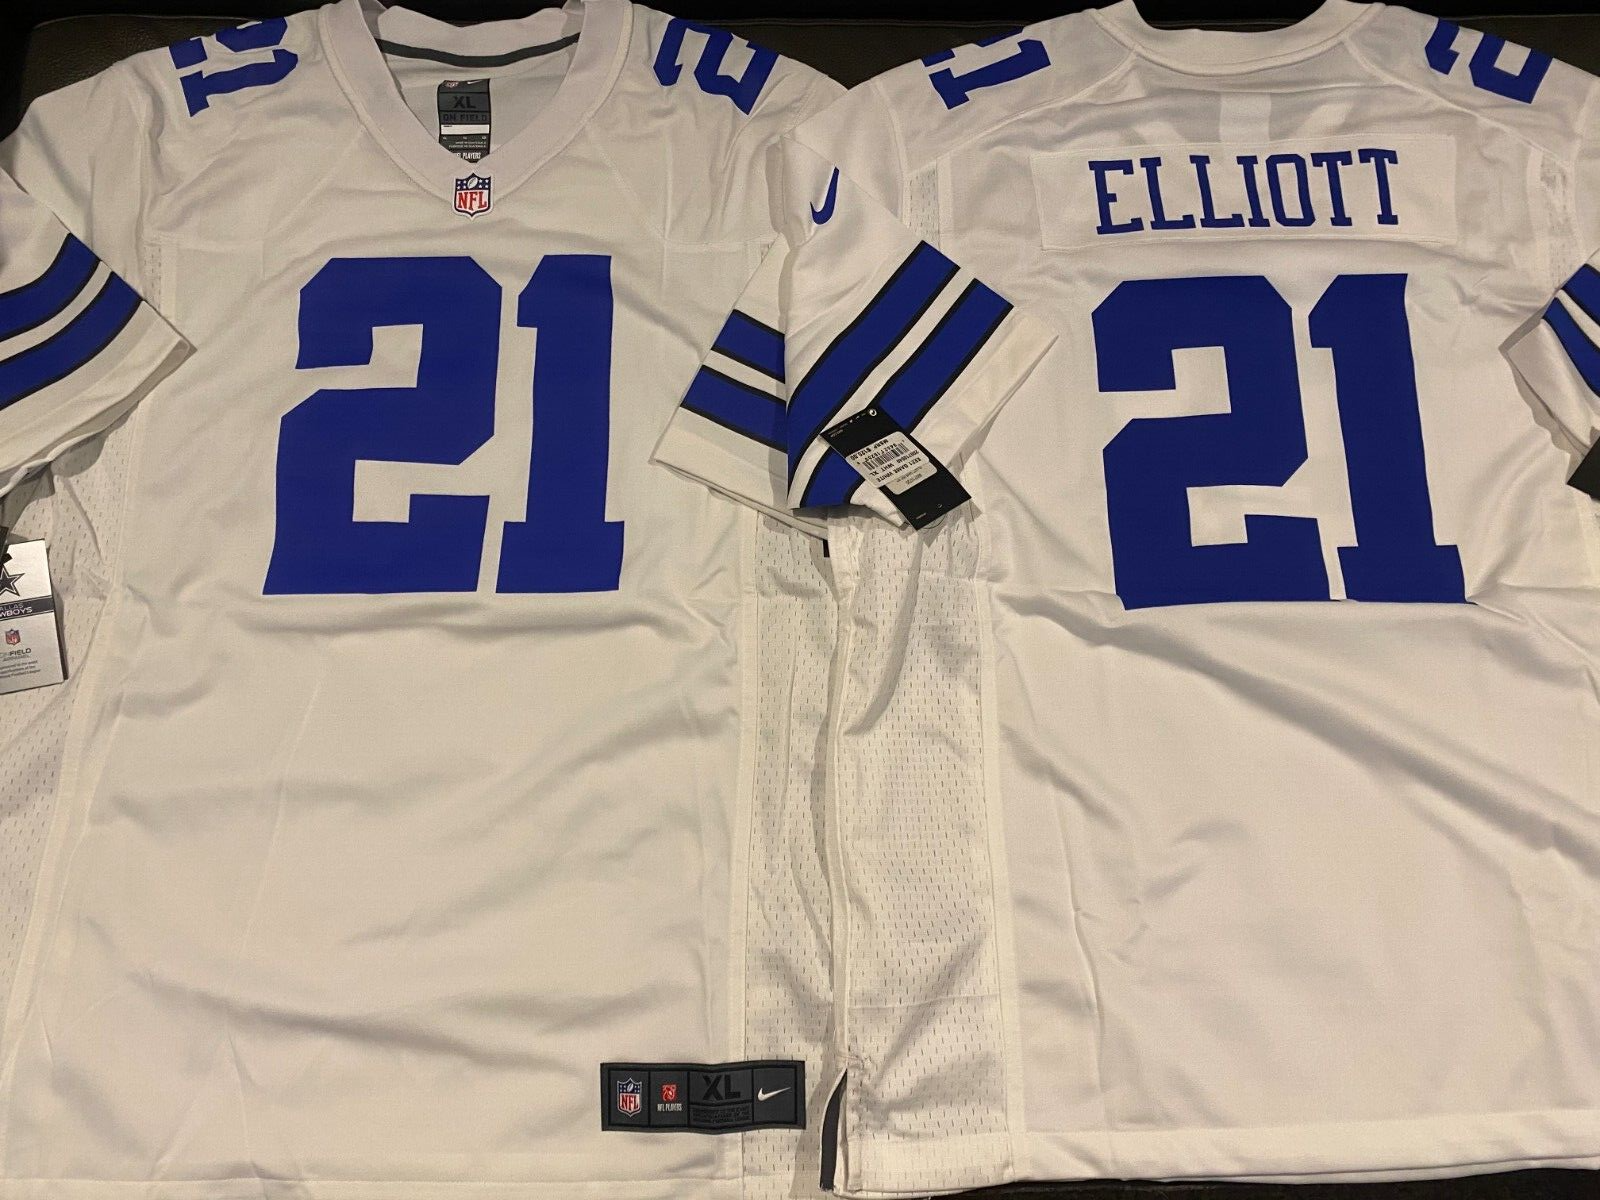 Primary image for NIKE NFL DALLAS COWBOYS EZEKIEL ELLIOTT MEN'S JERSEY L New with tags